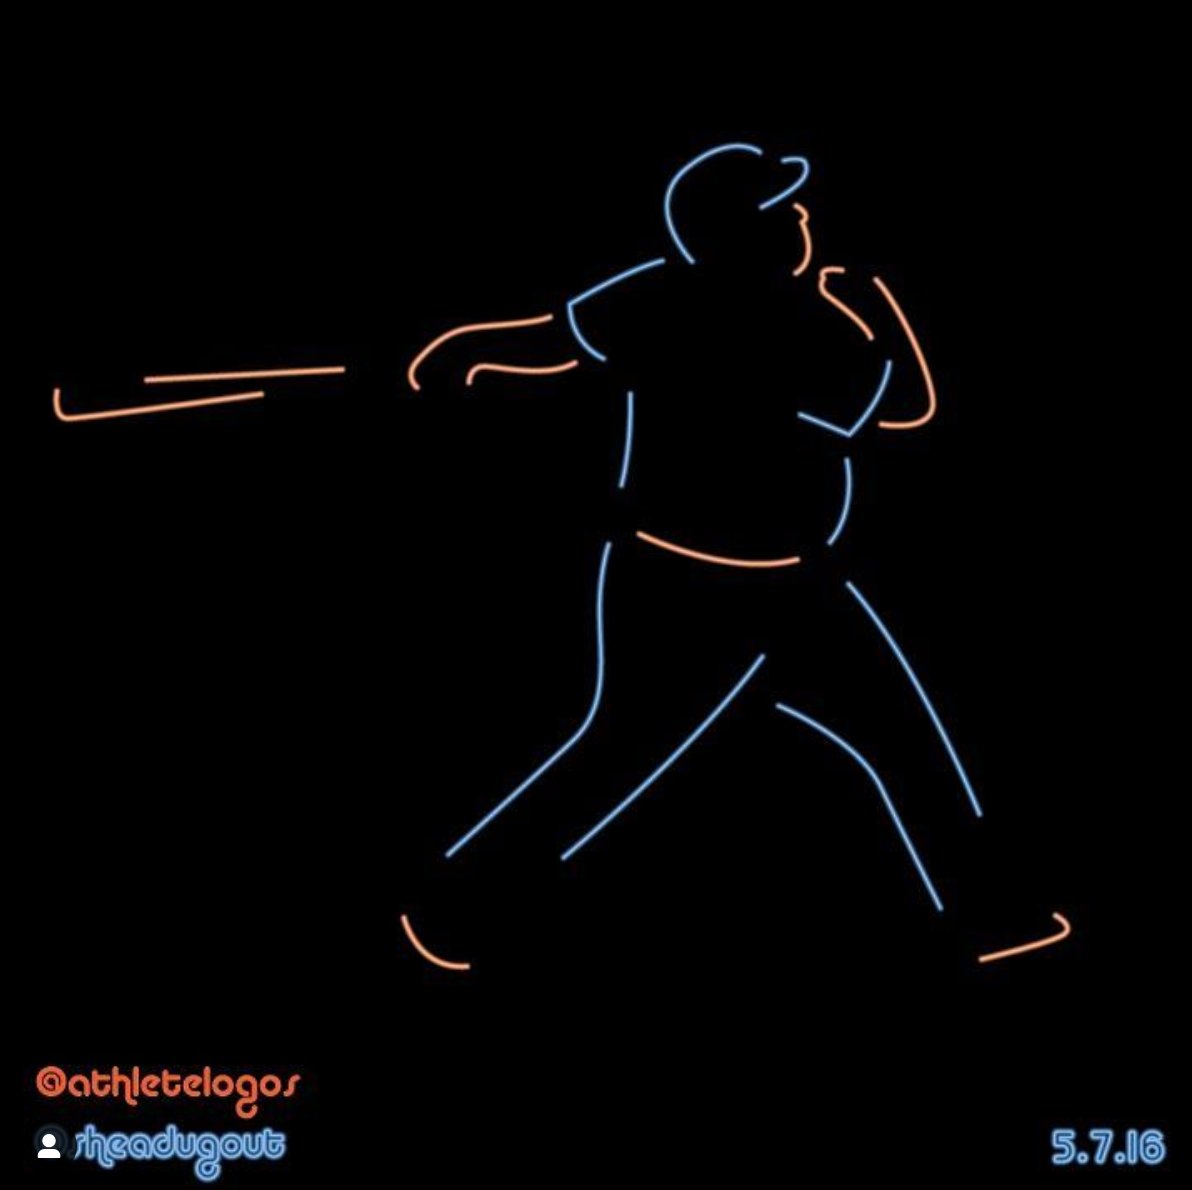 Since 2016 I have created a neon figure for the player, or play of the game after every Mets win. I have also done some historic moments in Mets history like the Endy catch or Gary Carter and Jesse Orosco in 86.